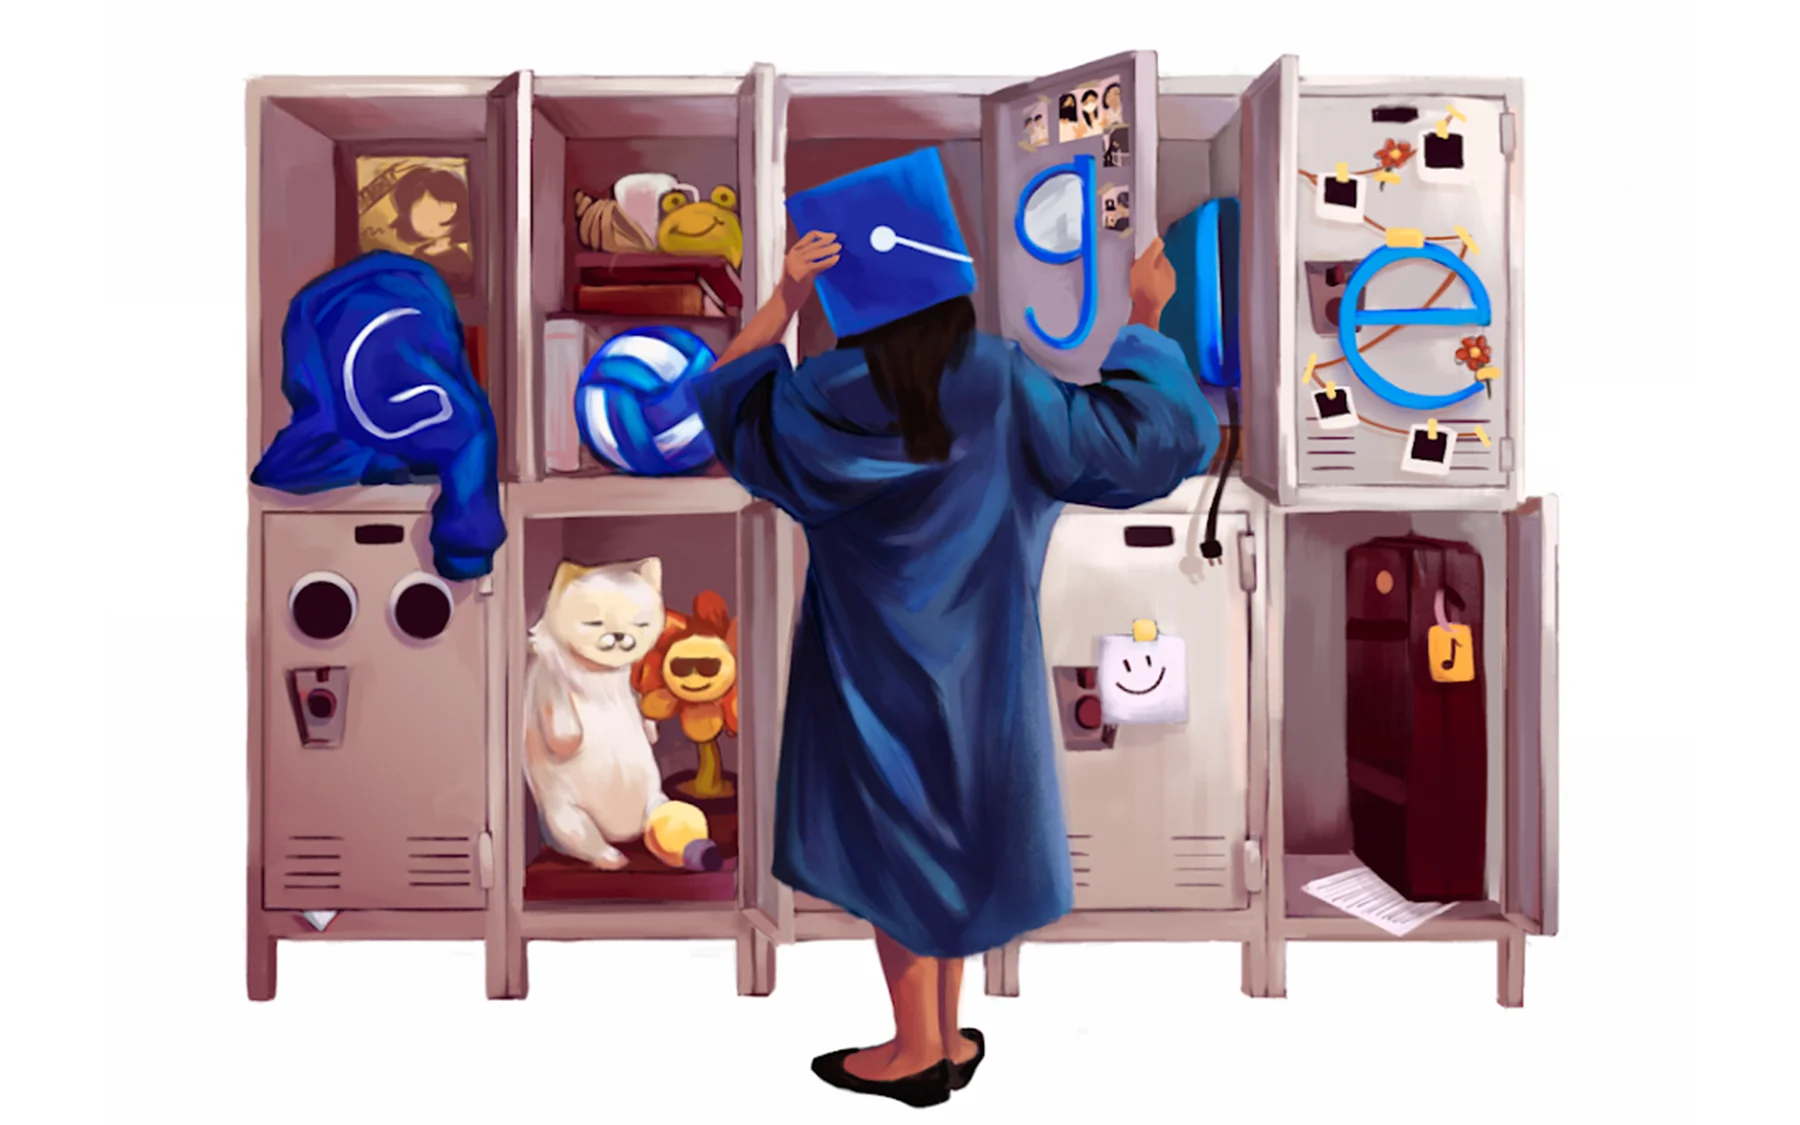 Illustration of a girl standing in front of lockers with her back facing front wearing a blue graduation gown and cap. The GOOGLE logo is featured in the center of frame made out of locker elements. The G is on a sweatshirt, the first O is represented by a volleyball, the second O is represented by the graduation cap, the G is posted inside a locker door, the L is represented by an waffle maker inside a locker, and the E is posted on the front of a locker door. Various locker doors are open, holding miscellaneous school items.